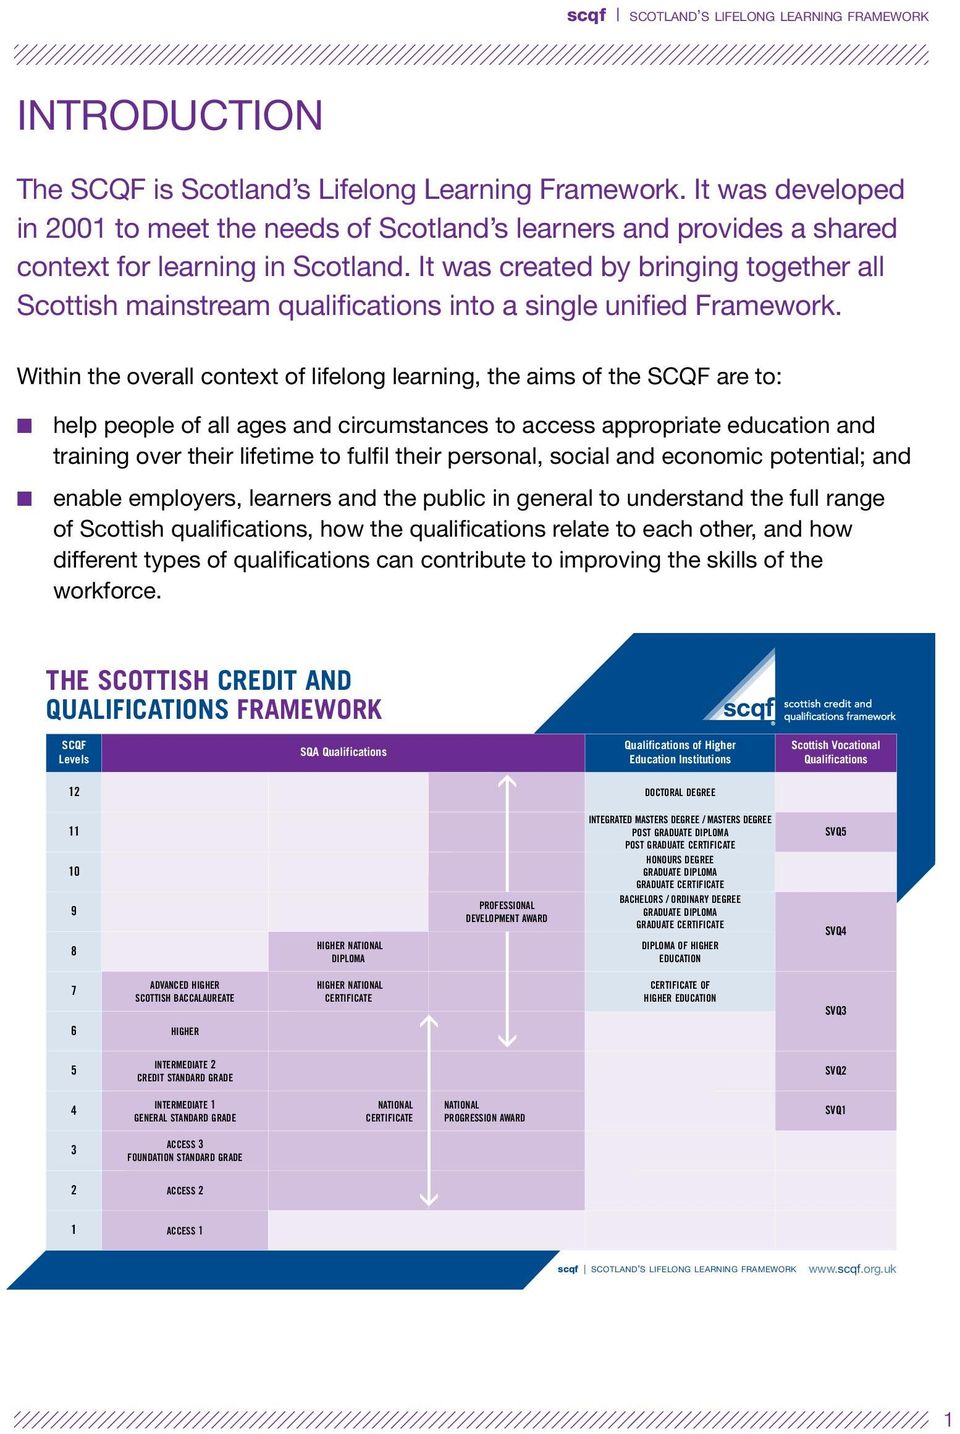 It was created by bringing together all Scottish mainstream qualifications into a single unified Framework.